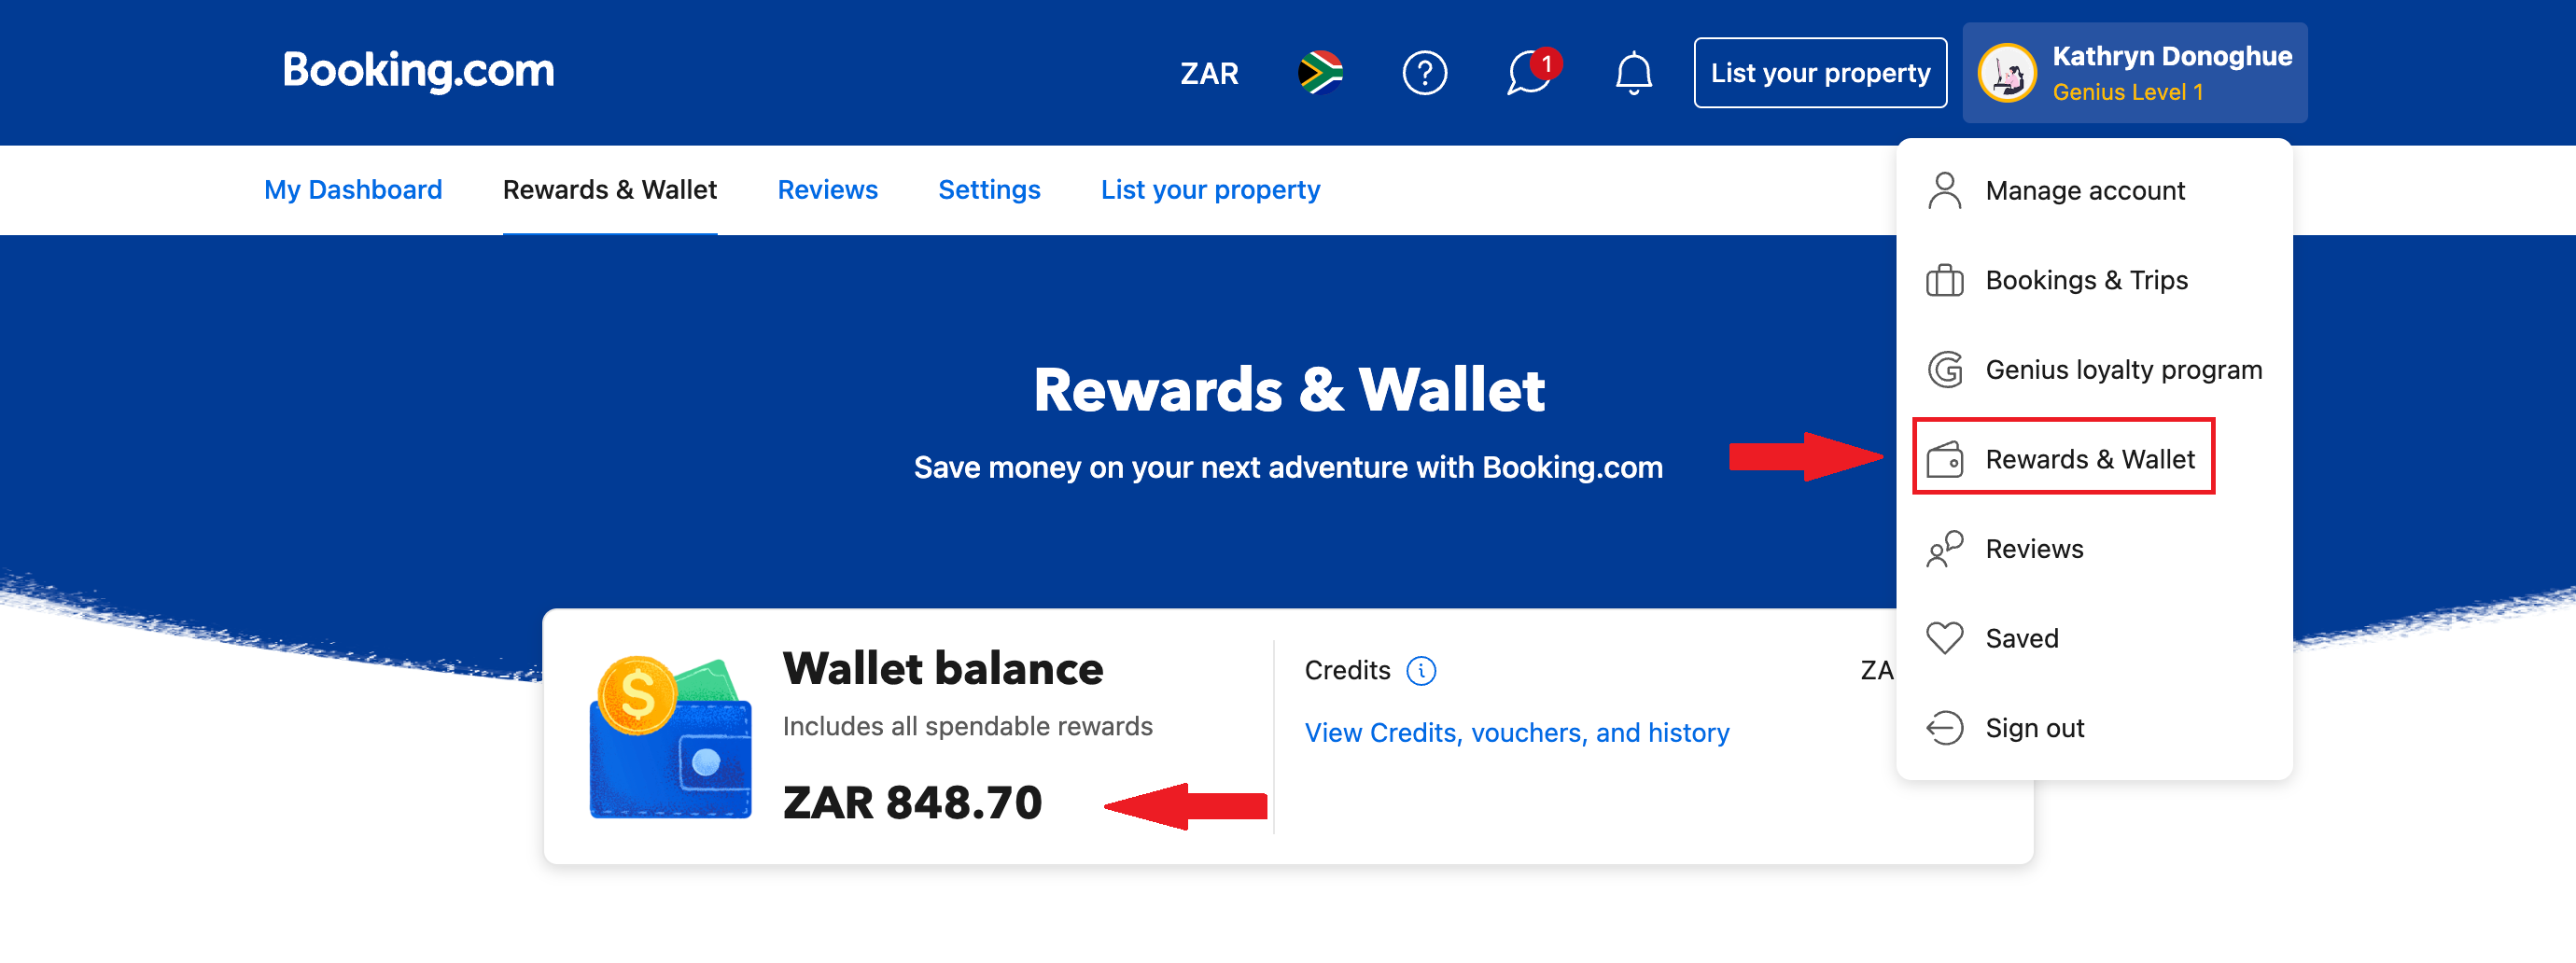 A user's rewards and wallet section on Booking.com, highlighting a wallet balance and the option to save money on future adventures with Booking.com, accompanied by an image of the Miss Tourist logo